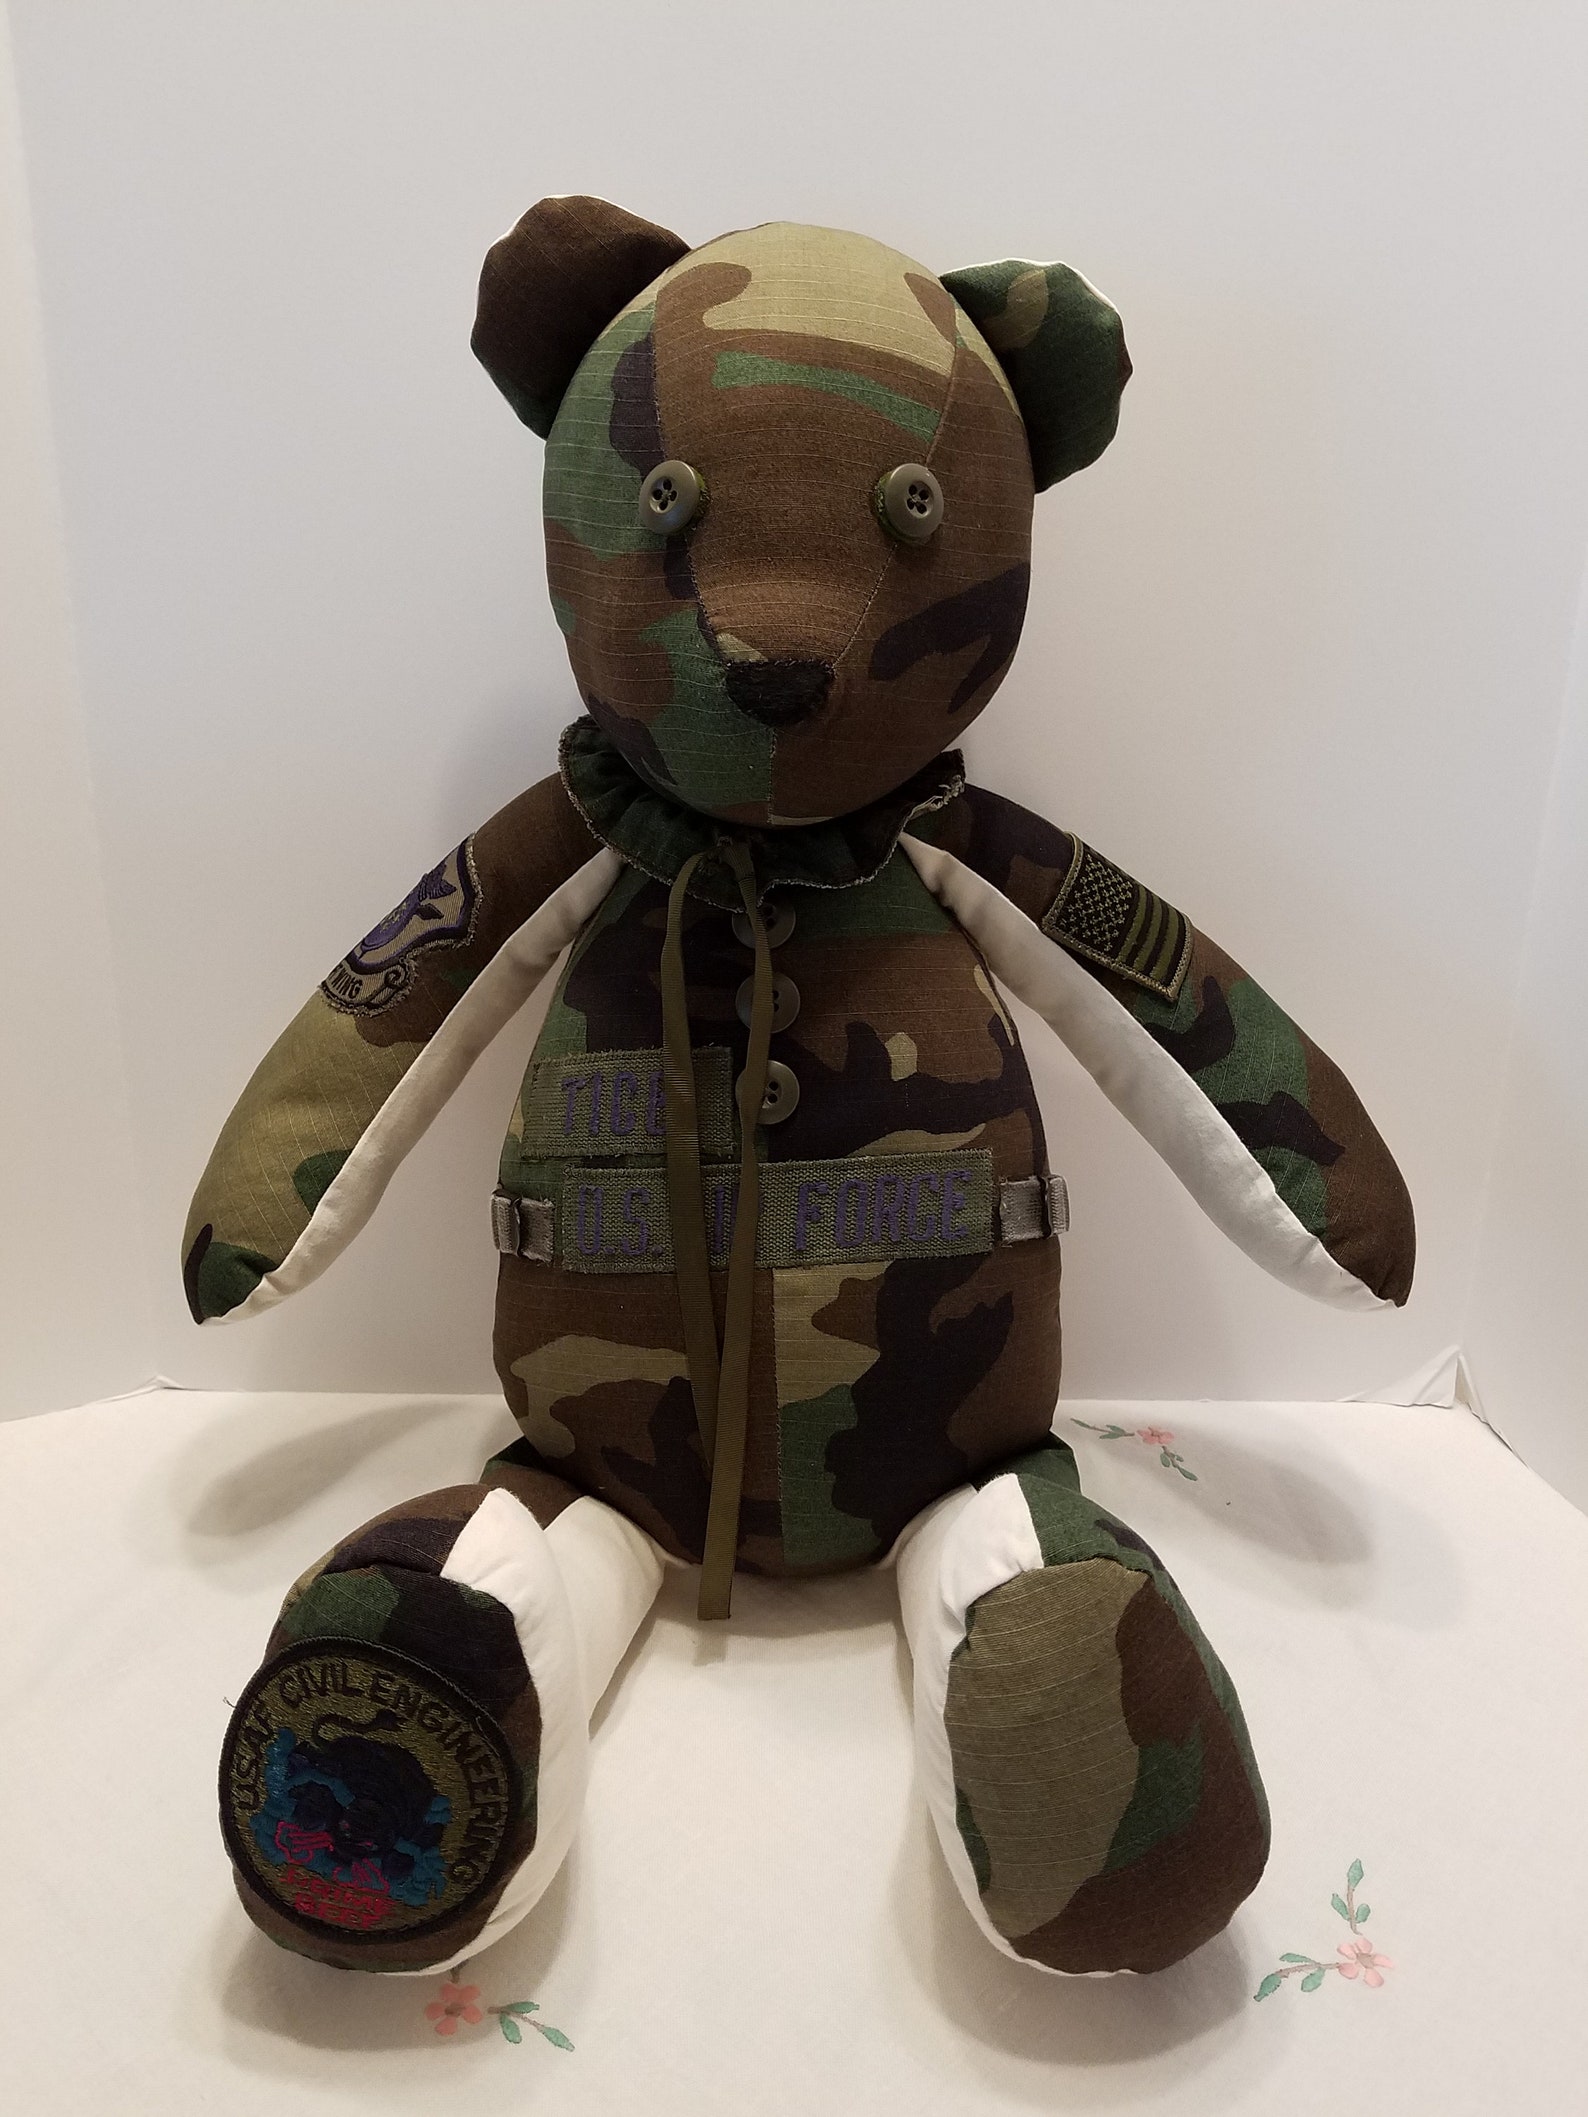 MILITARY MEMORY BEAR 22 Inch Custom Made from Military or | Etsy